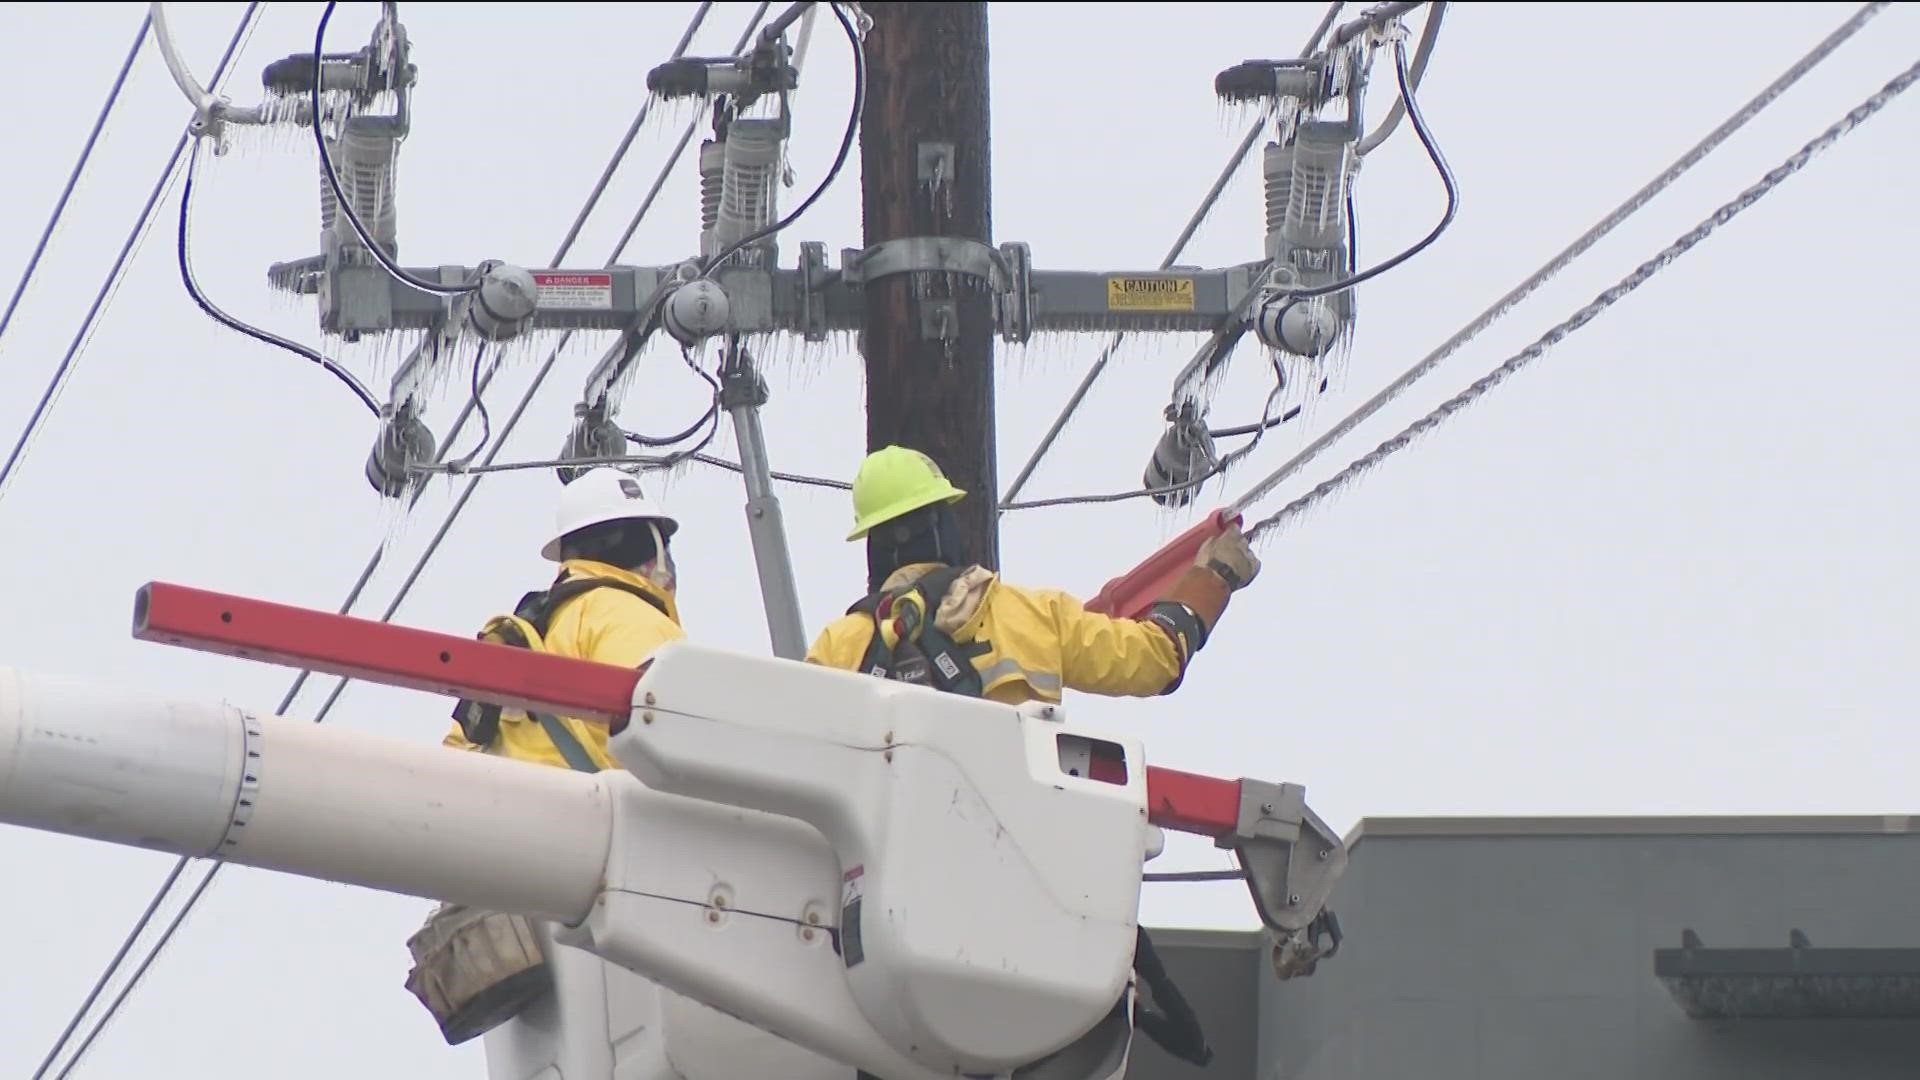 Austin Energy leaders told city councilmembers that about 70% of the power outages they're seeing are small, so they're more complex to deal with.